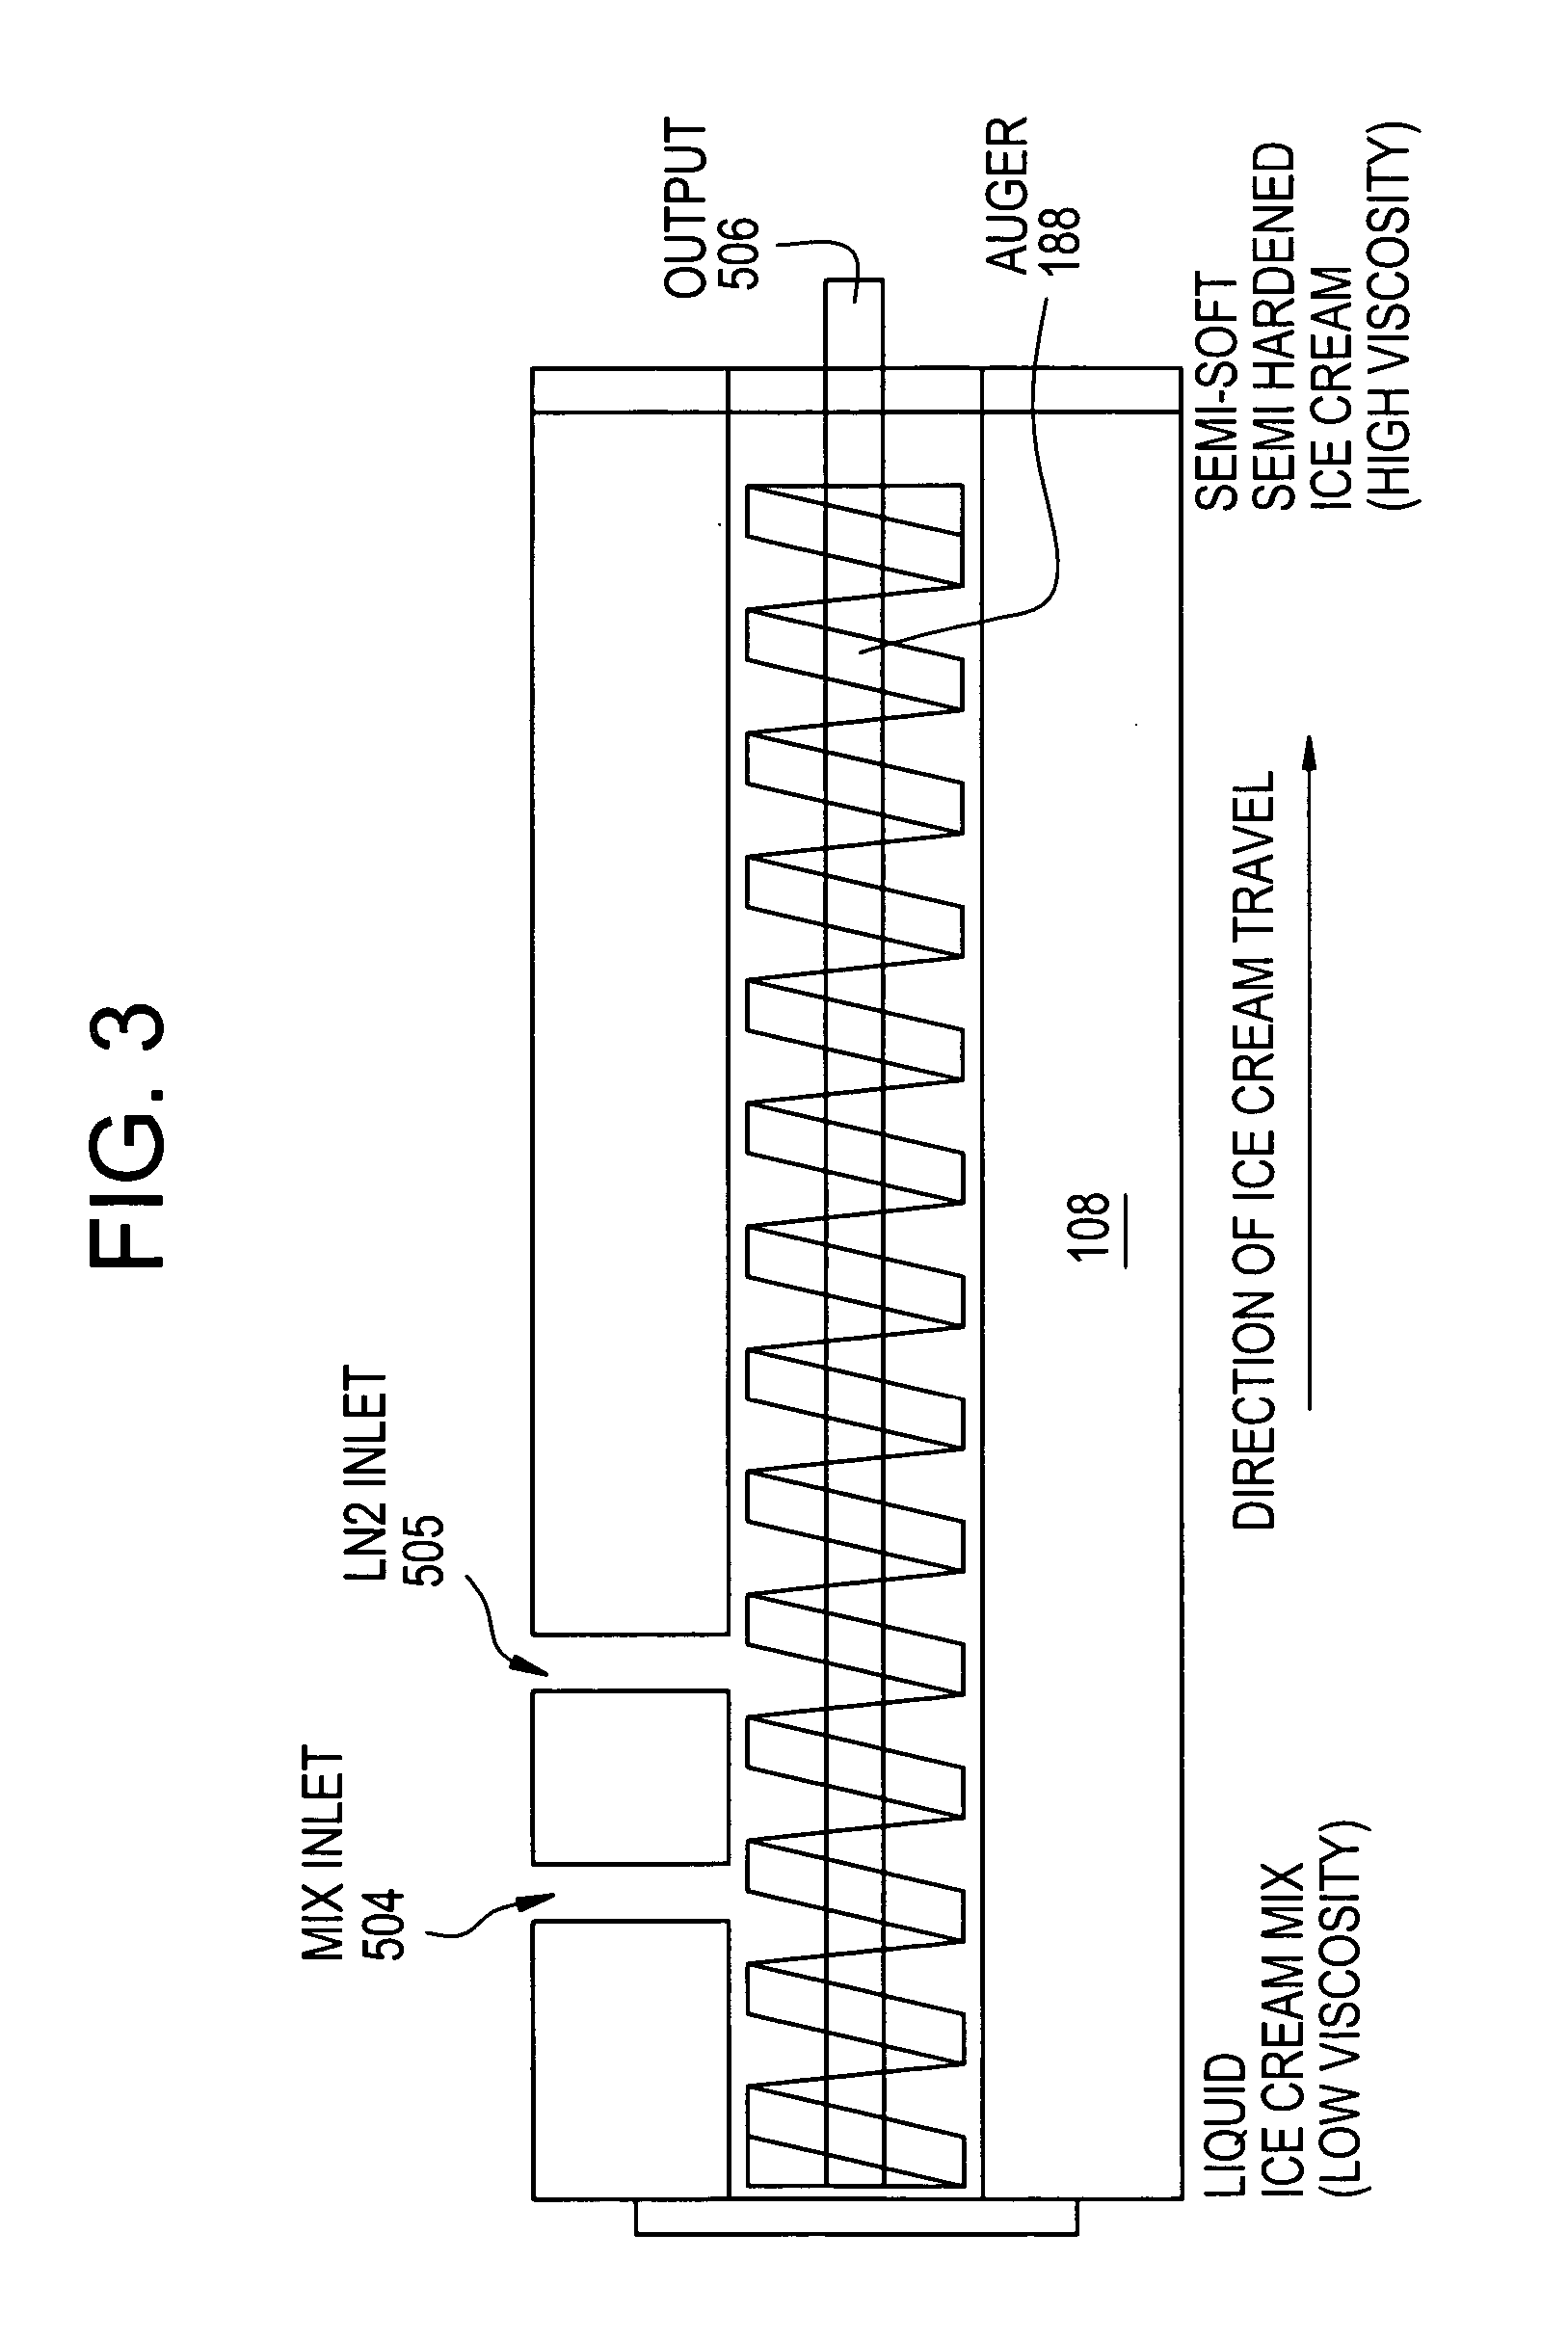 Method and apparatus for cryogenically manufacturing ice cream